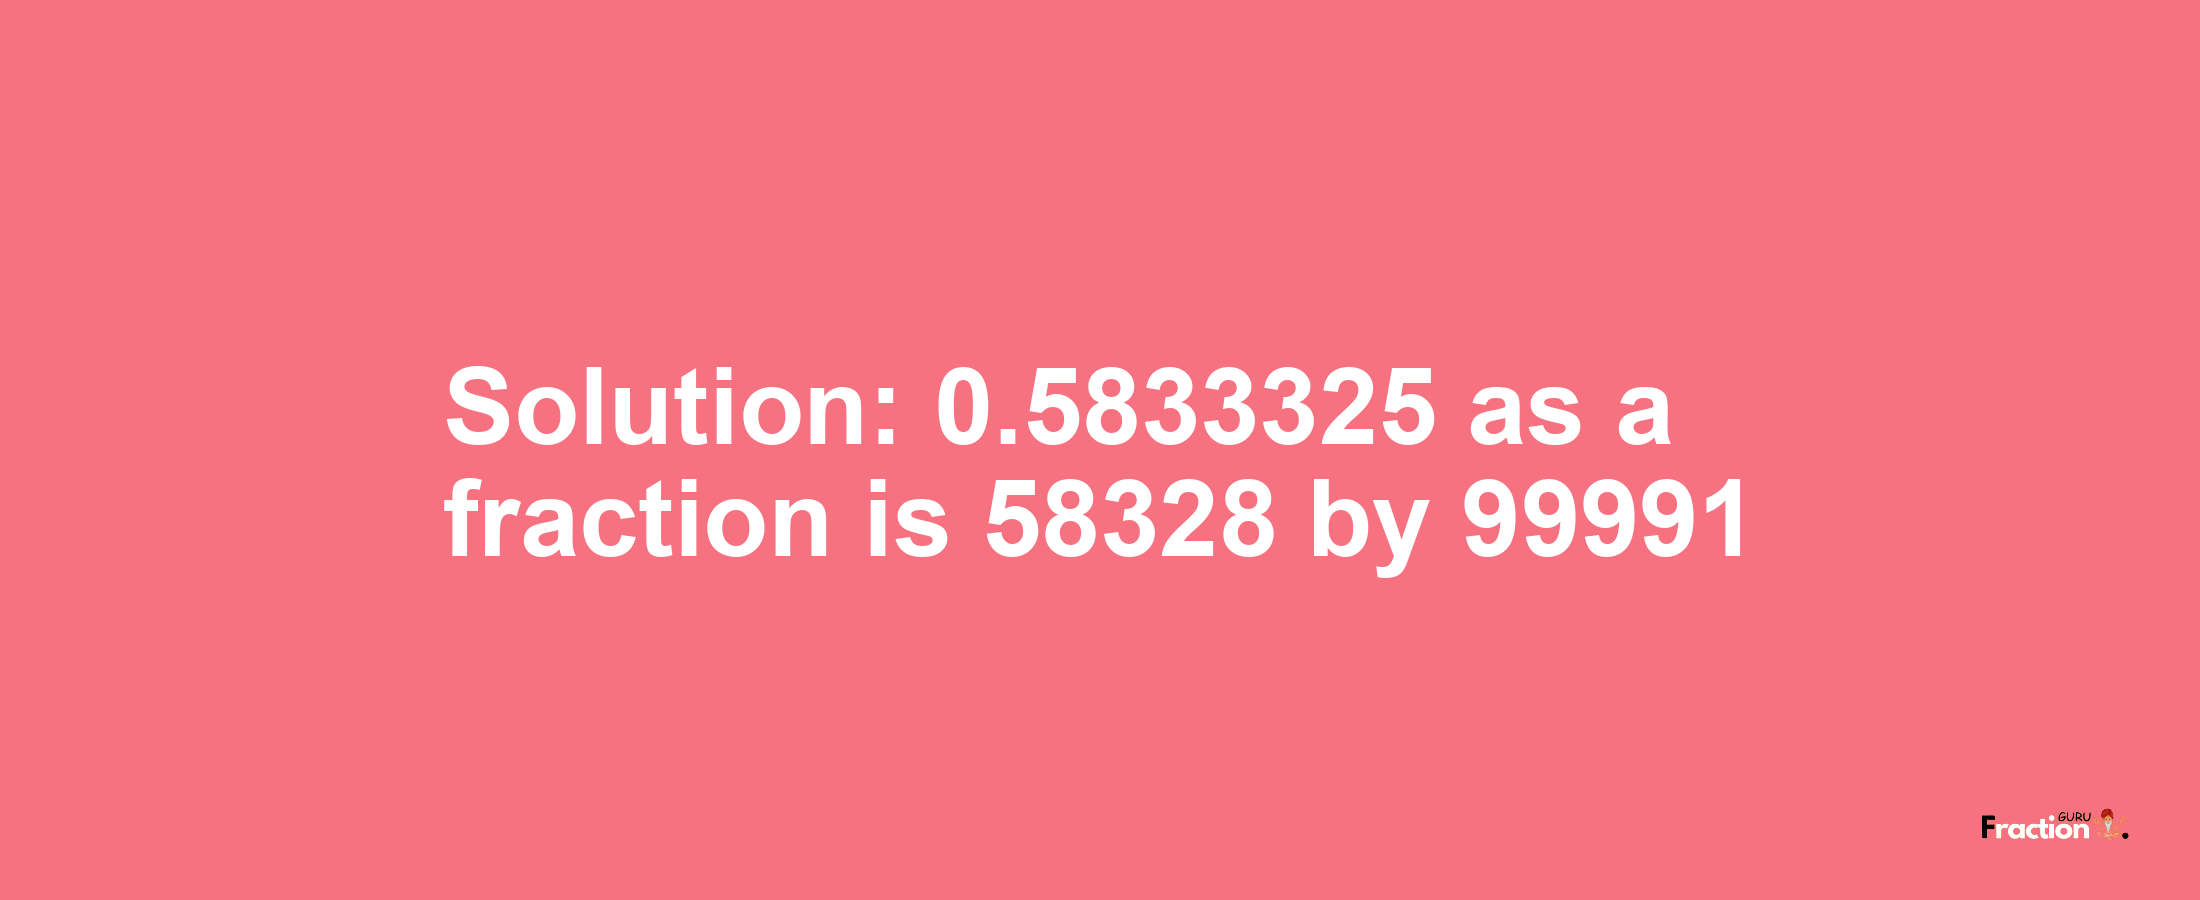 Solution:0.5833325 as a fraction is 58328/99991